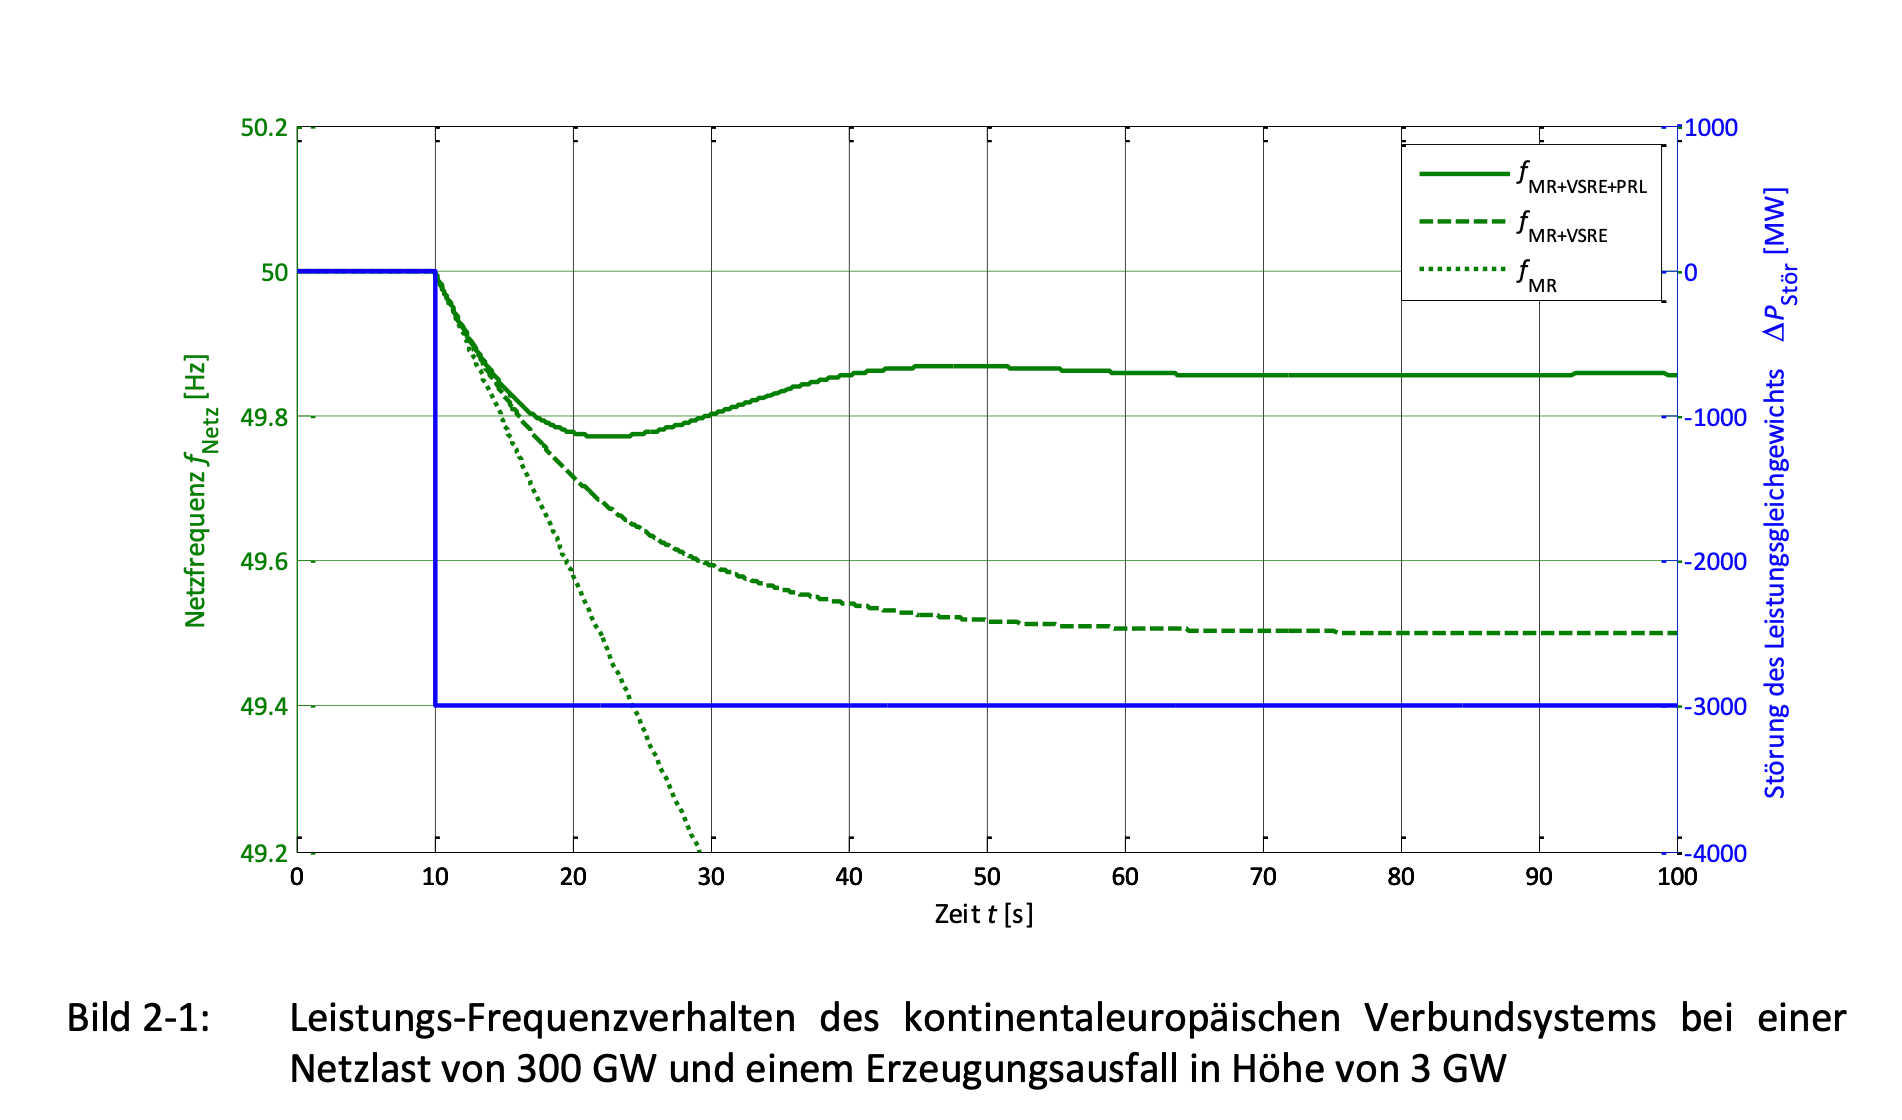 Frequency curve of a 3 GW disturbance in the UCTE grid with consideration of the momentum reserve and grid self-regulation effect